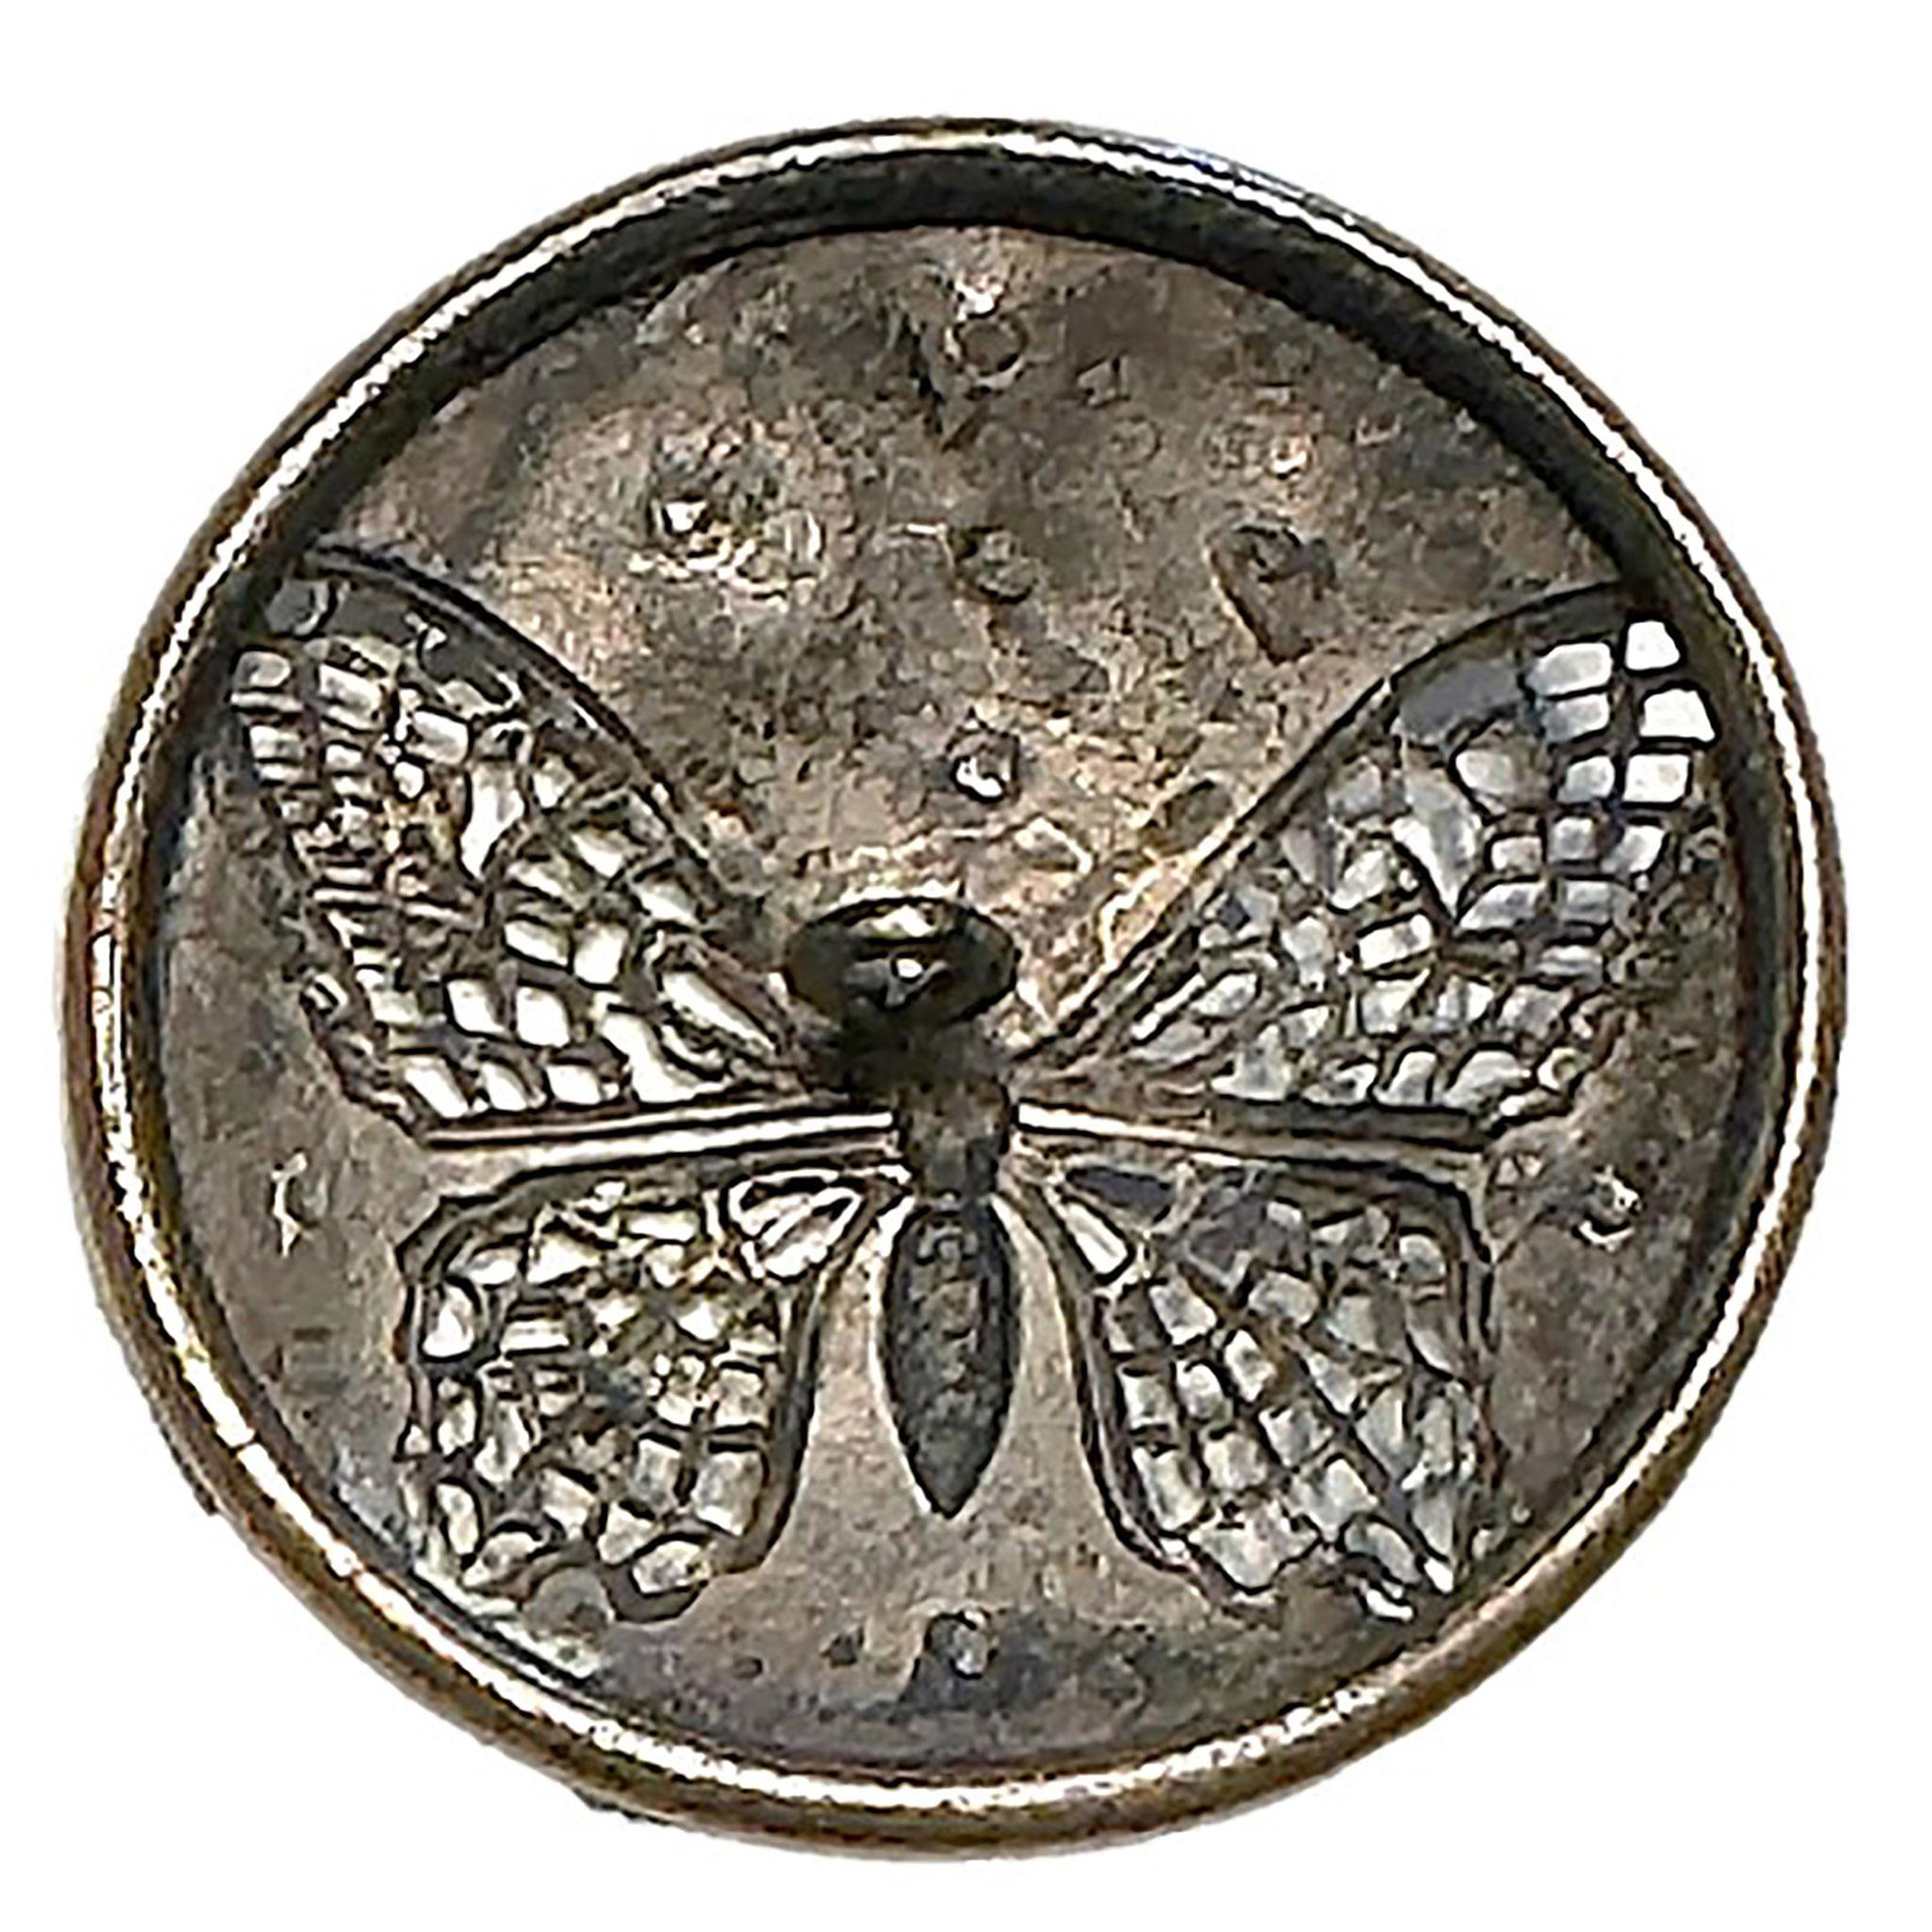 A division one pierced pictorial insect button - Image 3 of 3